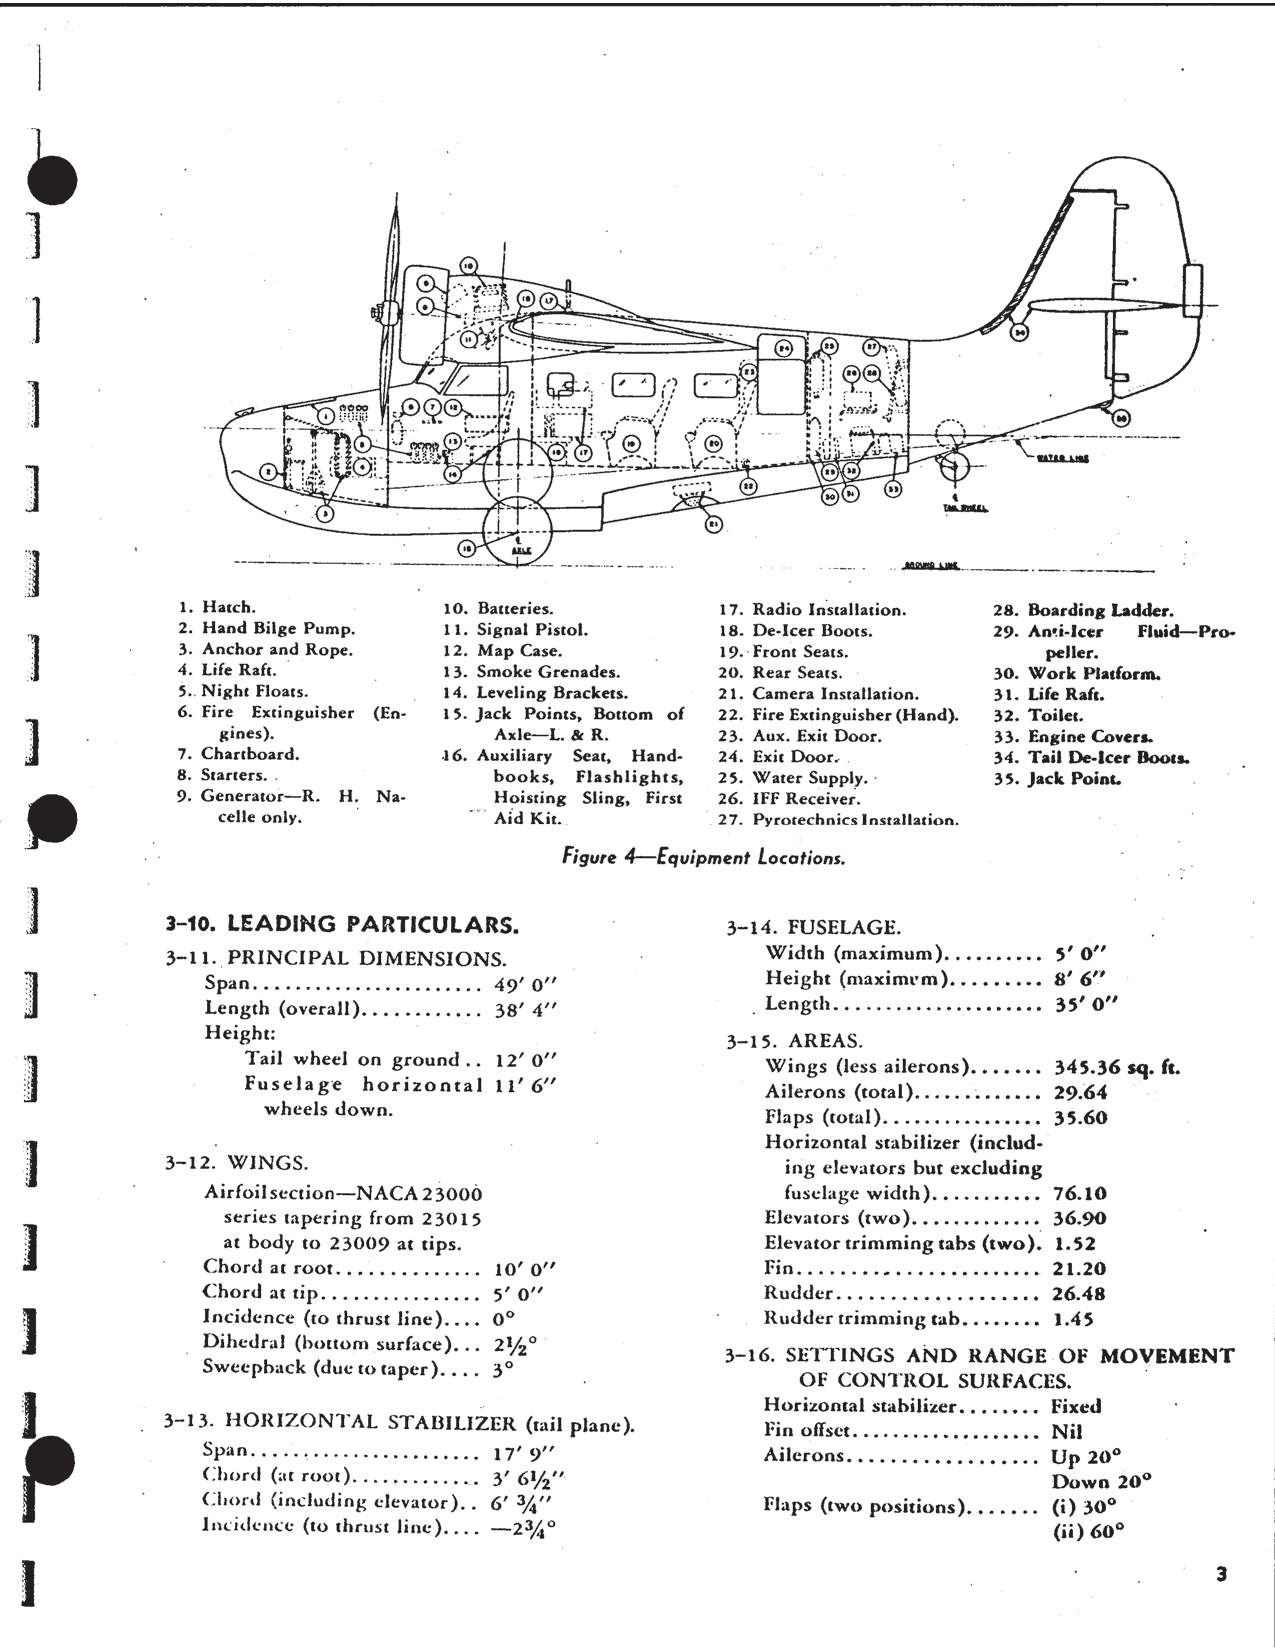 Sample page  9 from AirCorps Library document: Service Manual - Erection & Maintenance - Grumman Goose - G21A (JRF)